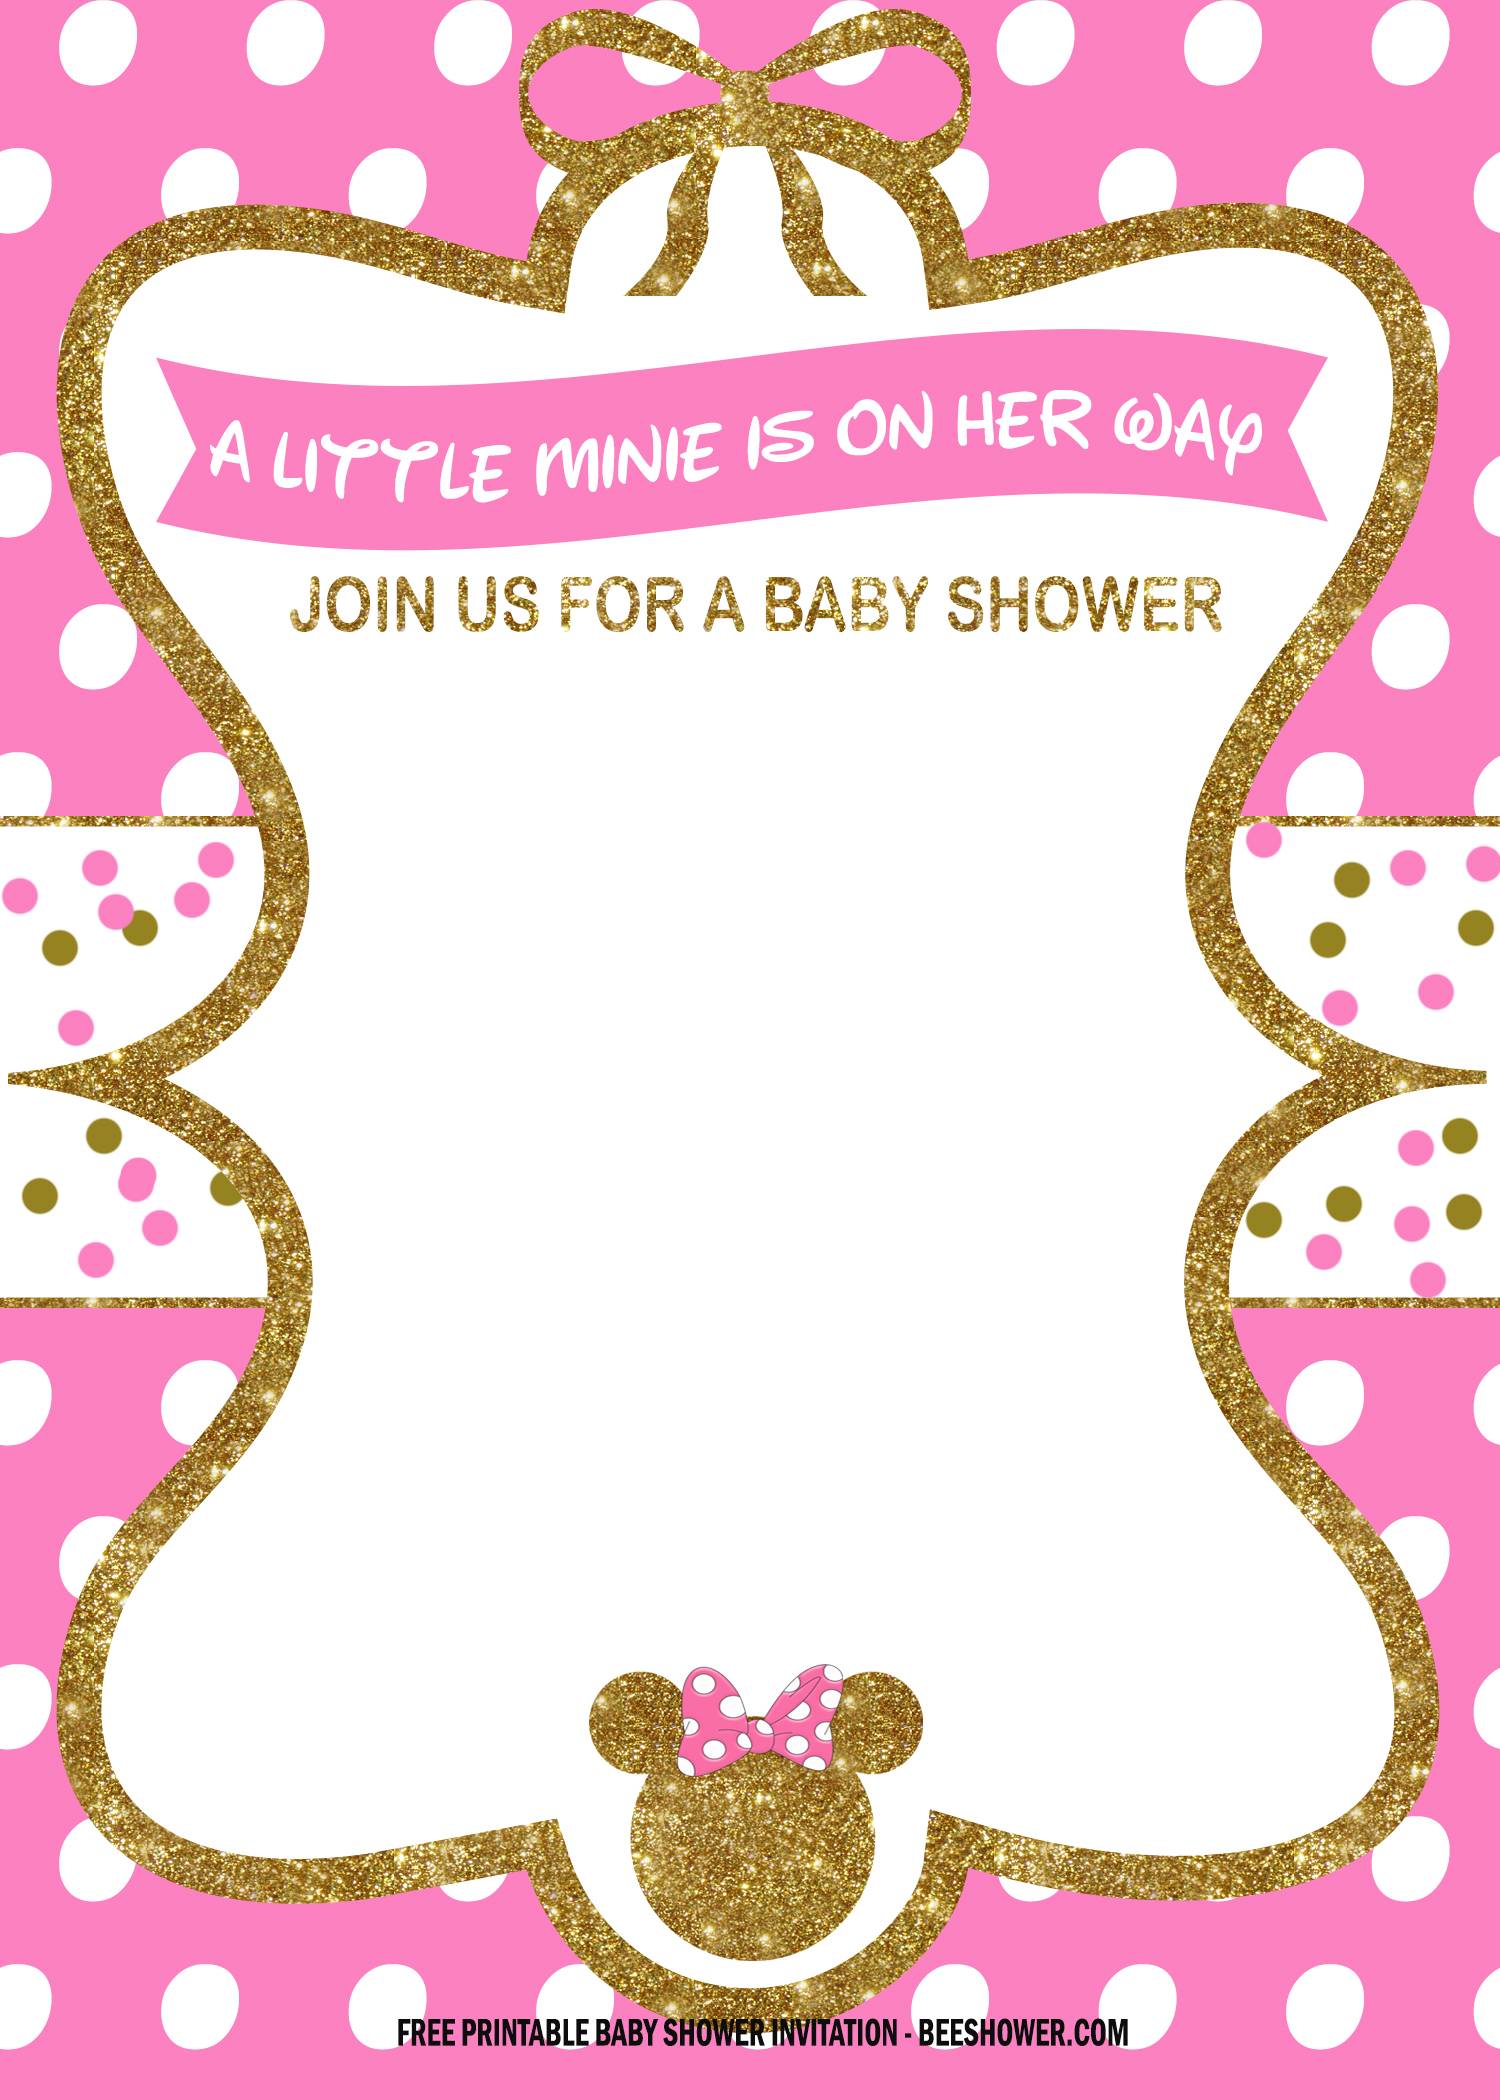 free-minnie-mouse-baby-shower-invitation-template-download-hundreds-free-printable-birthday